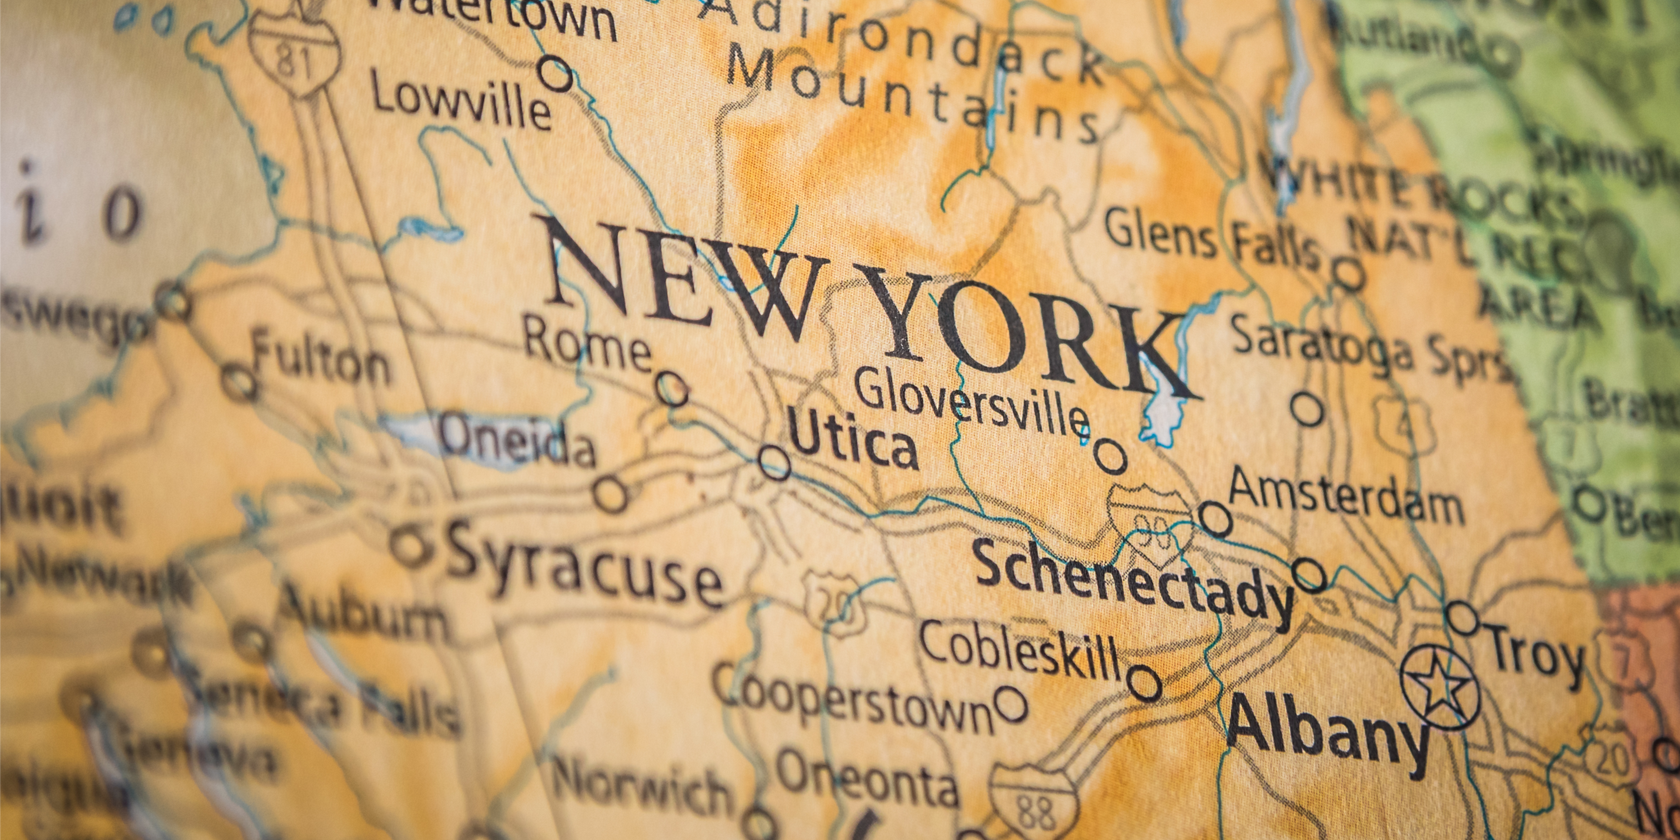 medical cannabis dispensary in albany new york